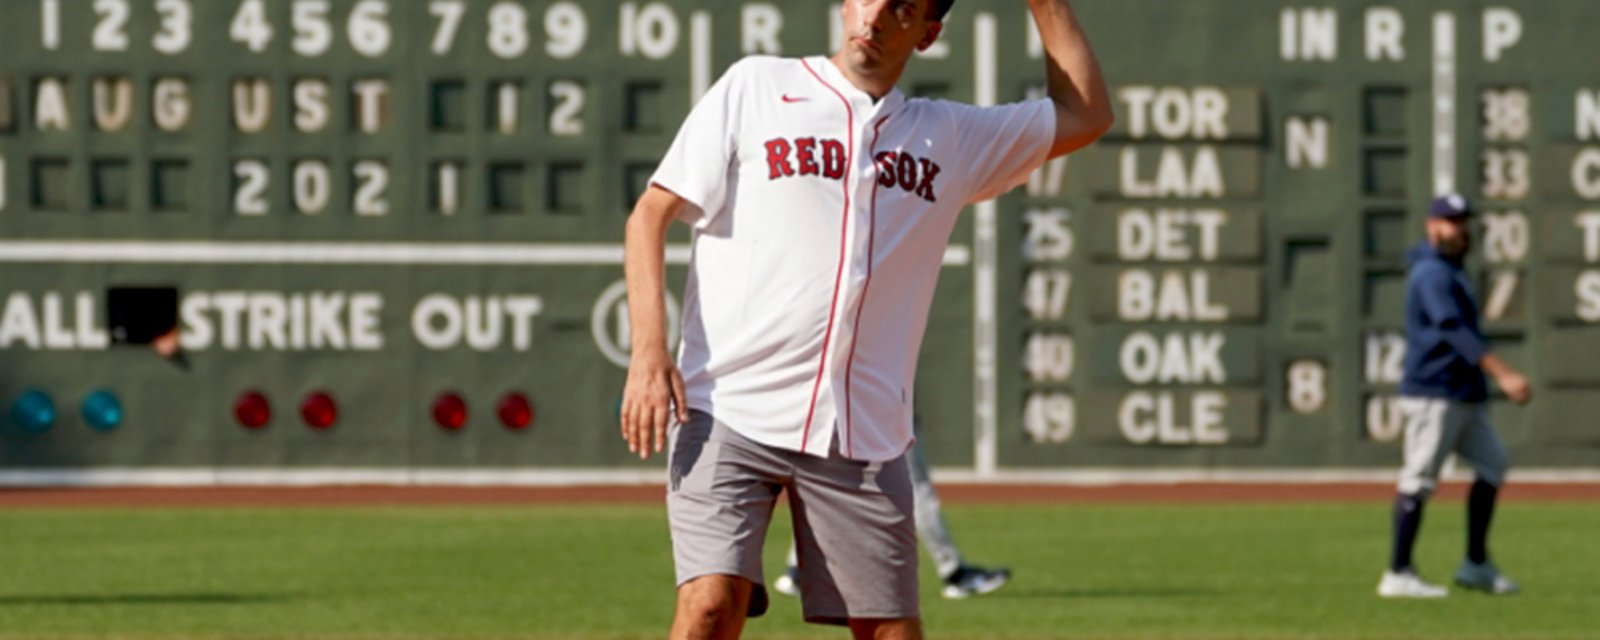 Calgary Flames assistant GM Chris Snow throws out first pitch at Fenway Park 